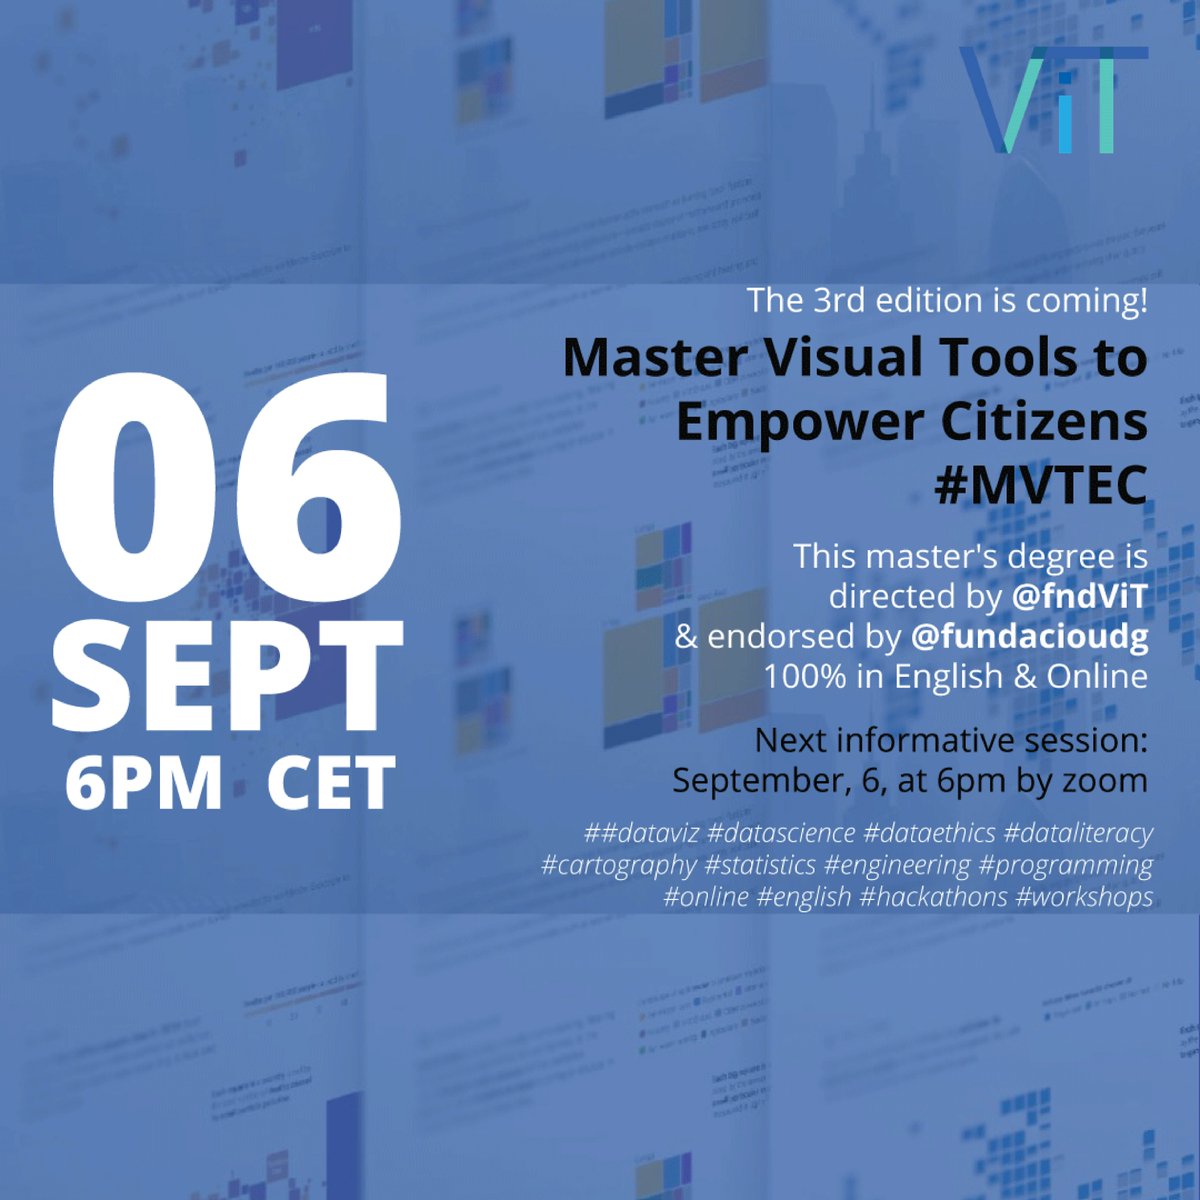 📊The 3rd edition of the Master Visual Tools to Empower Citizens (#MVTEC) led by @fndViT and endorsed by @fundacioudgis coming!
📌Informative session: Sept 6 at 6pm (CET) here:
zoom.us/j/3104656229

#dataviz #datascience #dataethics #cartography 
@AntonBardera @kpeiro @xocasgv